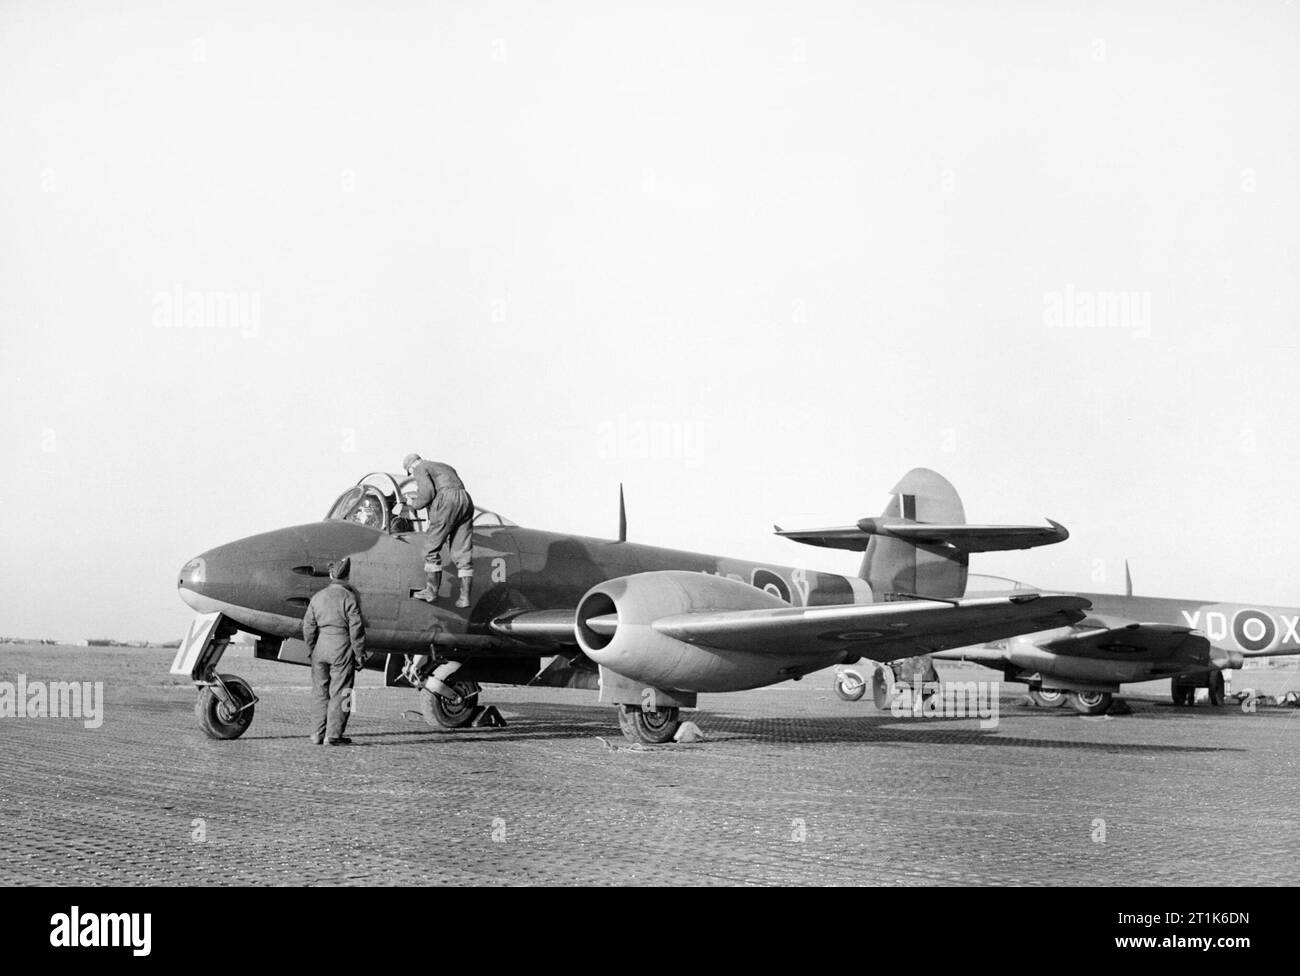 Gloster Meteor Mk Is of No. 616 Squadron RAF at Manston, Kent, 4 January 1945. Gloster Meteor Is of No 616 Squadron at Manston, 4 January 1945. The Allies' first operational turbo-jet aircraft, the Meteor entered service with No 616 in July 1944, being employed against the V-1s. Despite its revolutionary power-plant (two 1,700lb-thrust Rolls-Royce Welland engines), the Meteor I's top speed of 410mph was below that of the Tempest or Spitfire XIV. Stock Photo